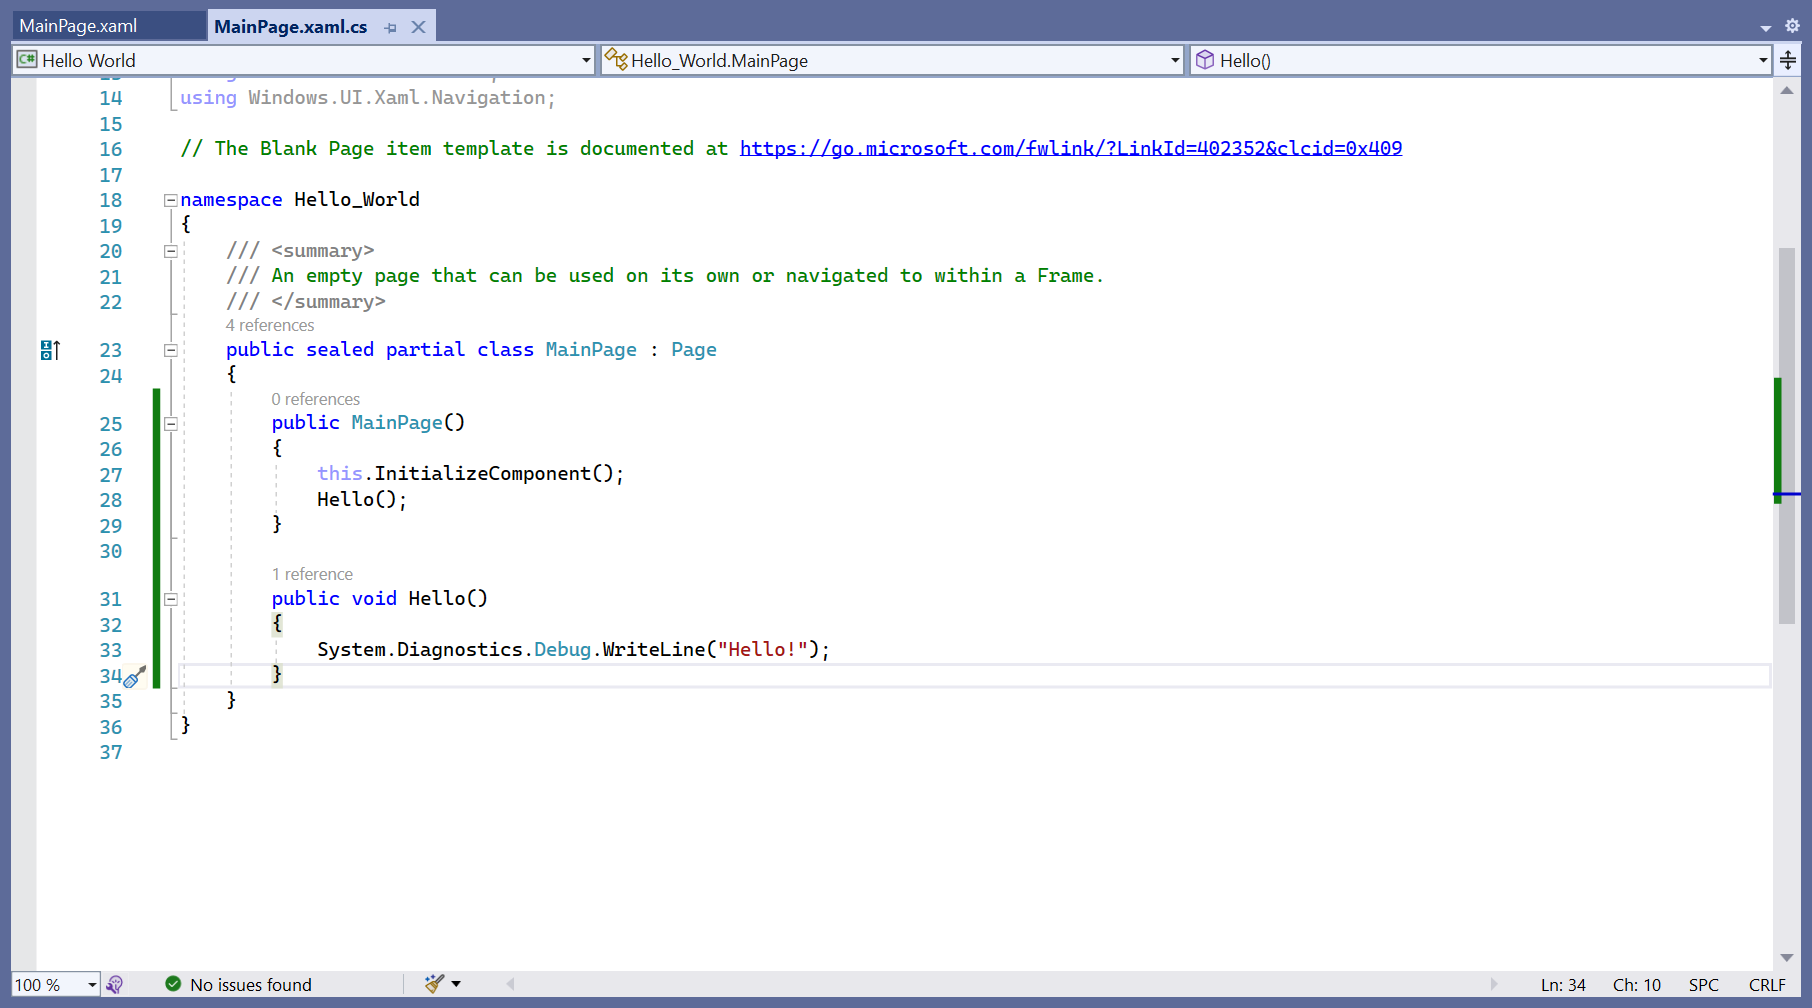 Screenshot of the editor window in Visual Studio. Sample code from the previous WriteLine steps is shown.